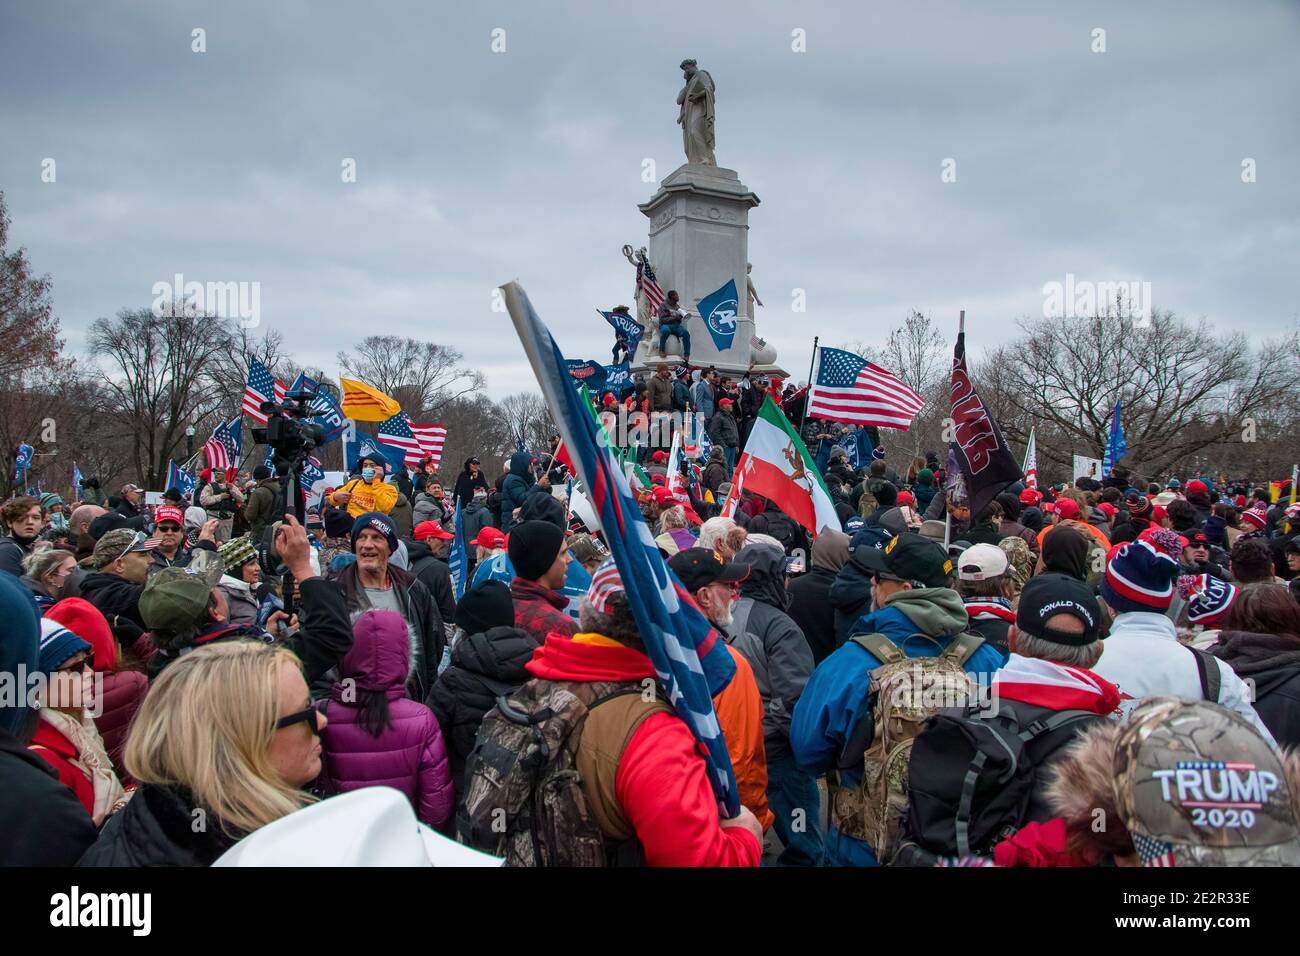 January 6th 2021. Large Crowds of Protesters at Capitol Hill with Donald Trump 2020 flags. US Capitol Building, Washington DC.USA Stock Photo